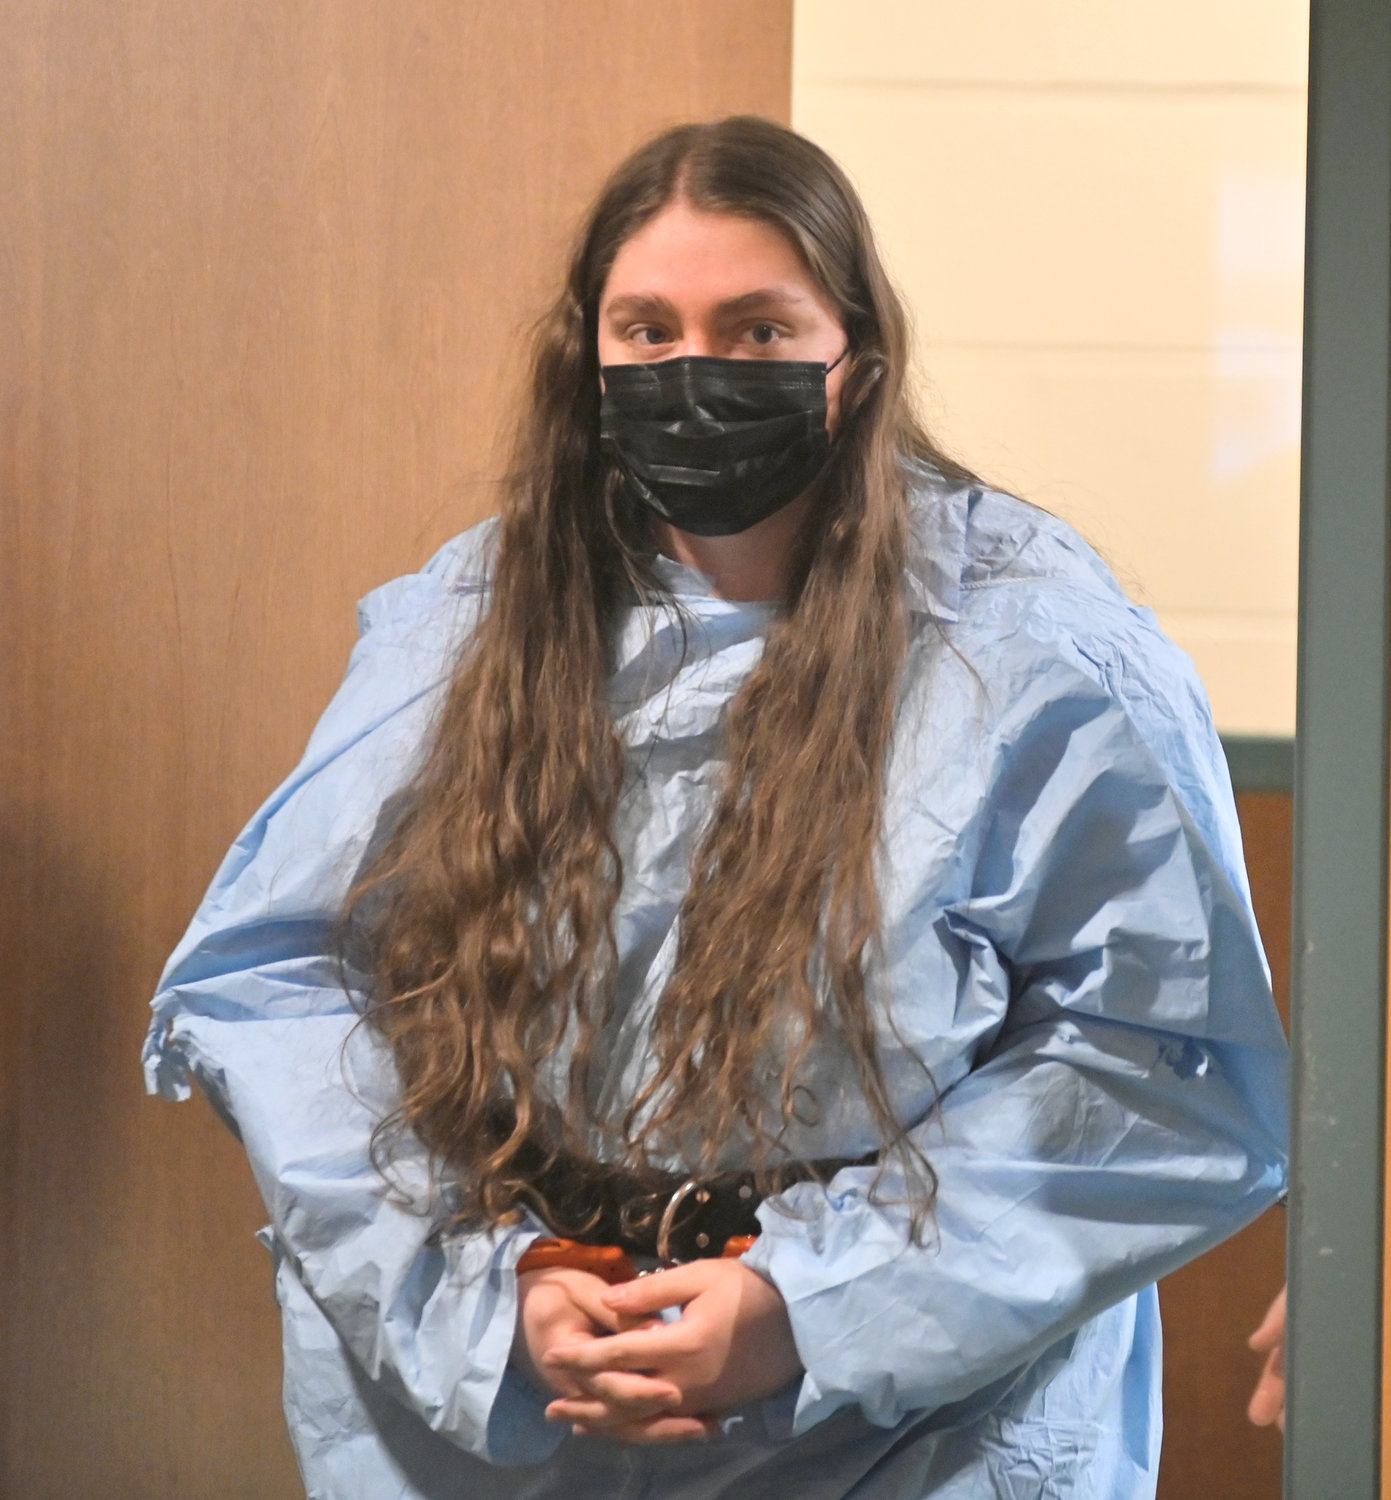 ACCUSED KILLER — Paleigh M. Iannarilli, age 23, accused of shooting and killing another person in her home on Milton Avenue in Rome Monday, made her first appearance in Rome City Court Tuesday morning. She pleaded not guilty to a charge of second-degree murder.